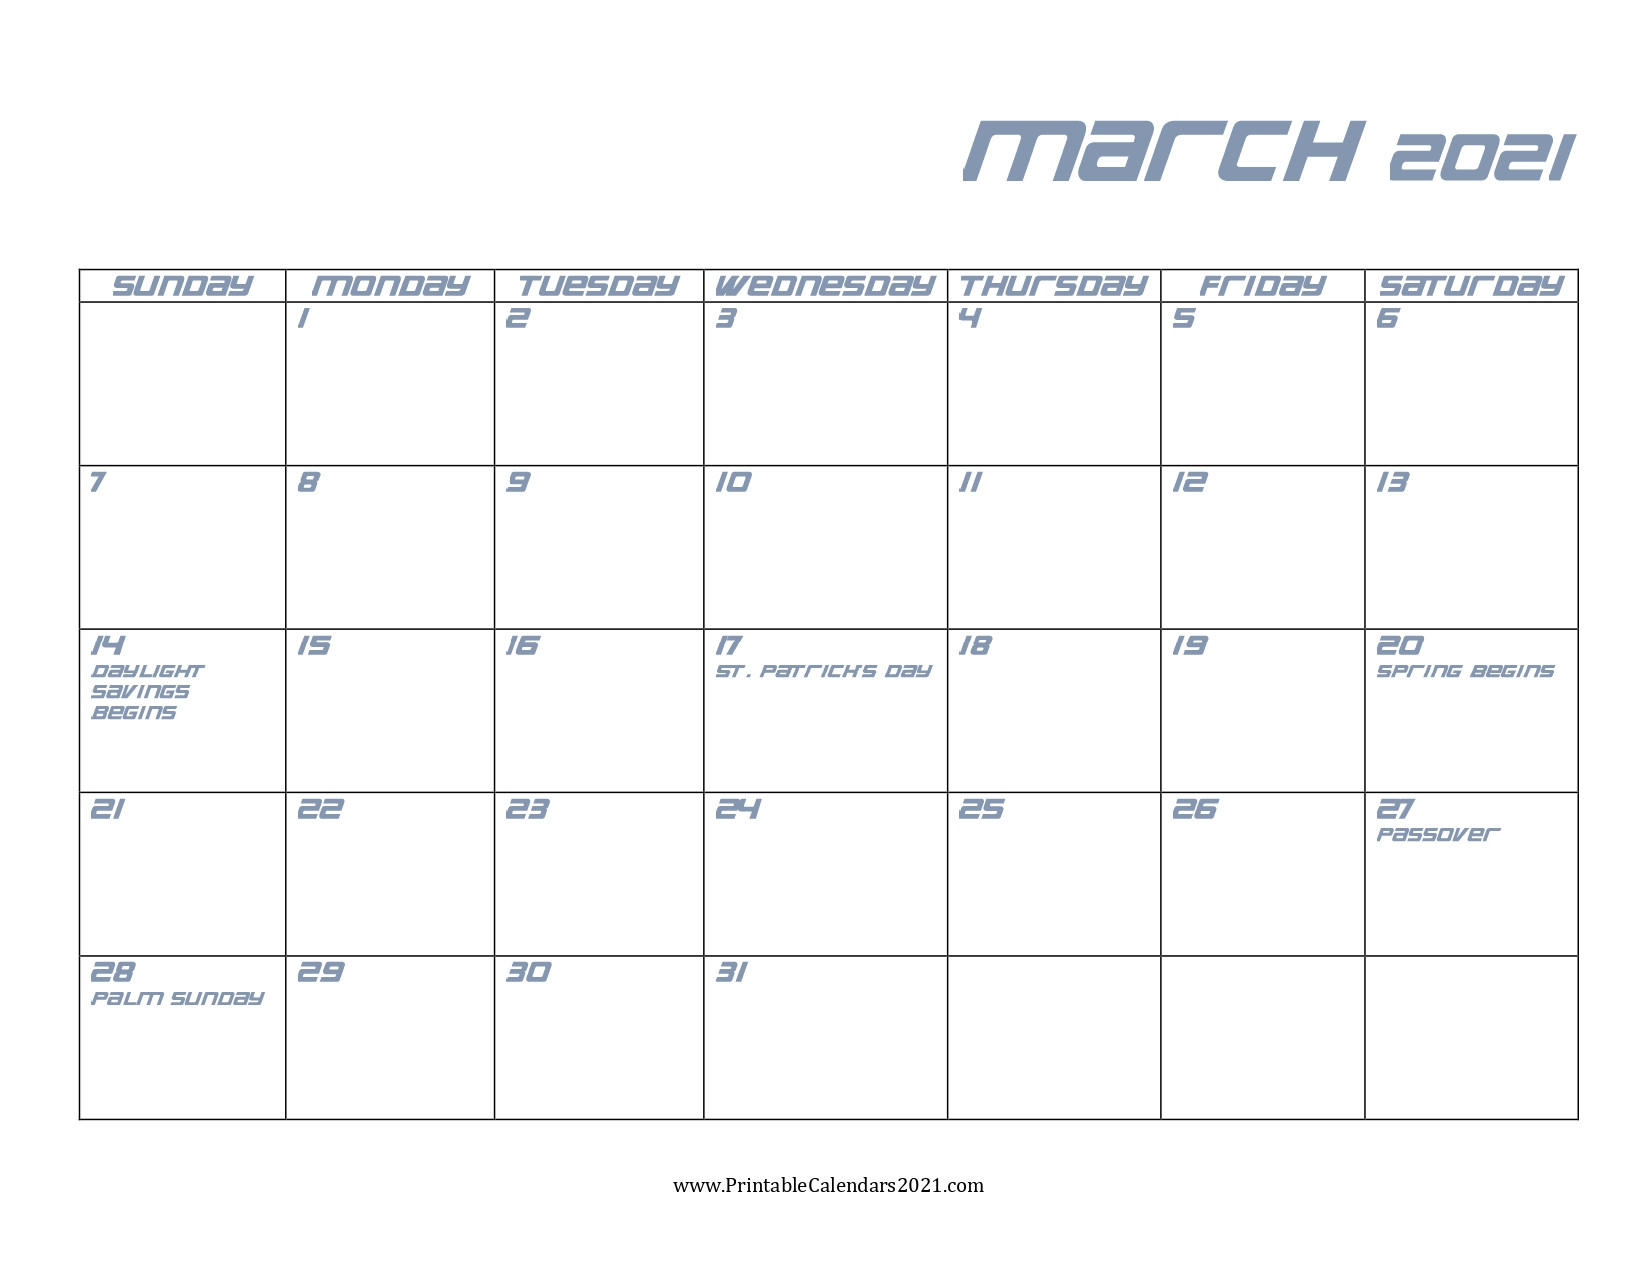 68+ Free March 2021 Calendar Printable With Holidays  Printable March 2021 Calendar Pdf